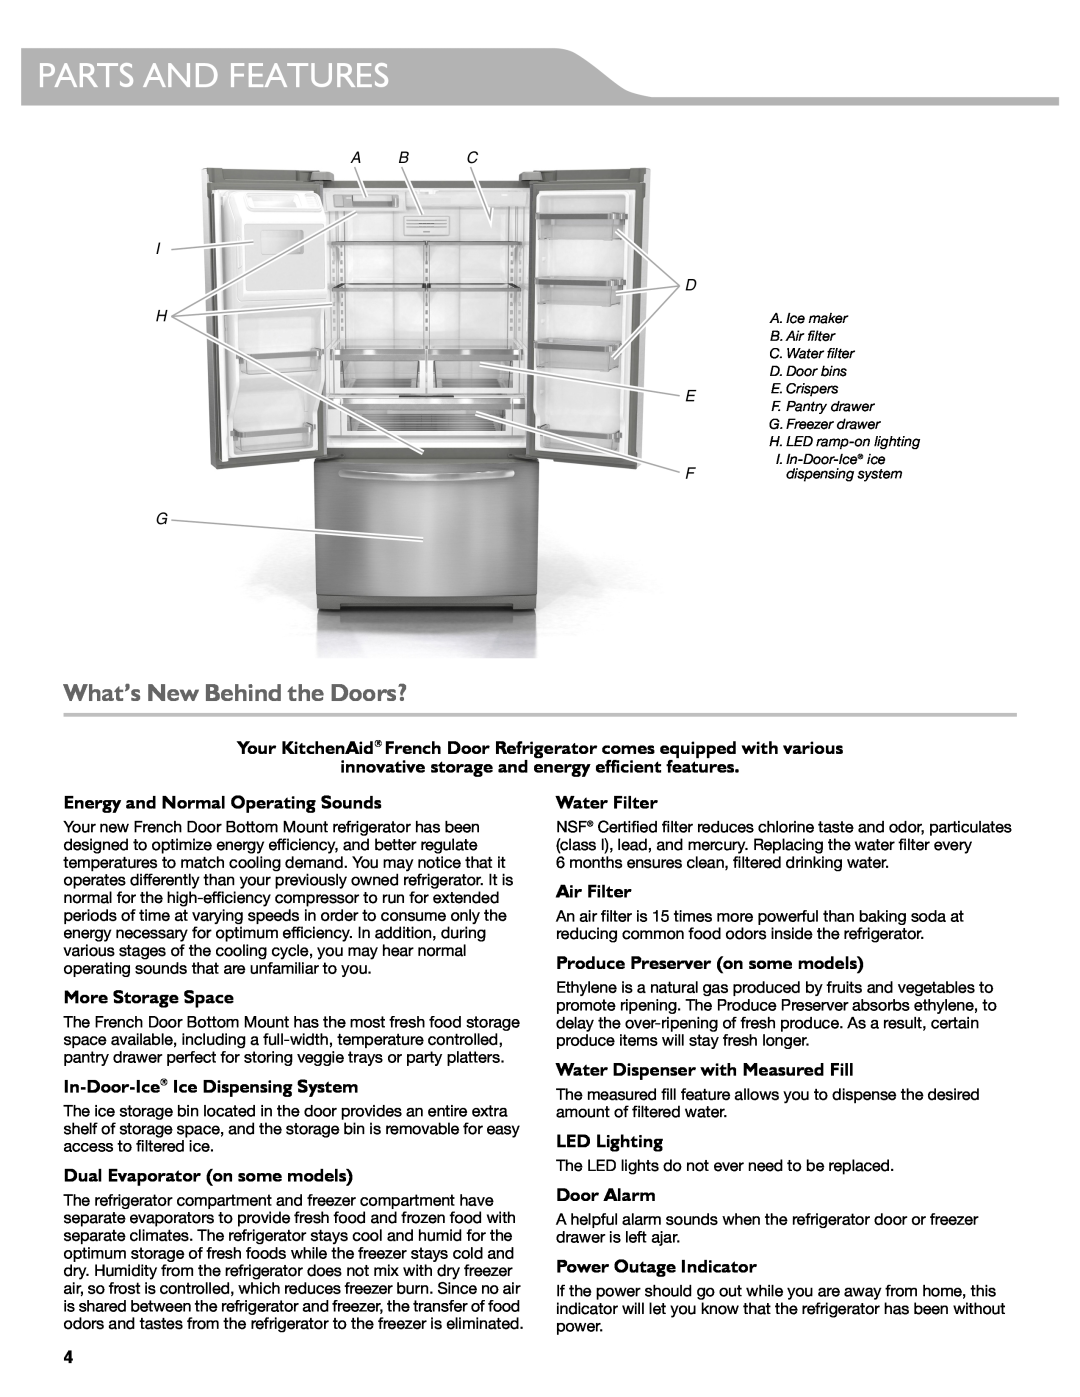 KitchenAid W10417002A Parts And Features, What’s New Behind the Doors?, innovative storage and energy efficient features 